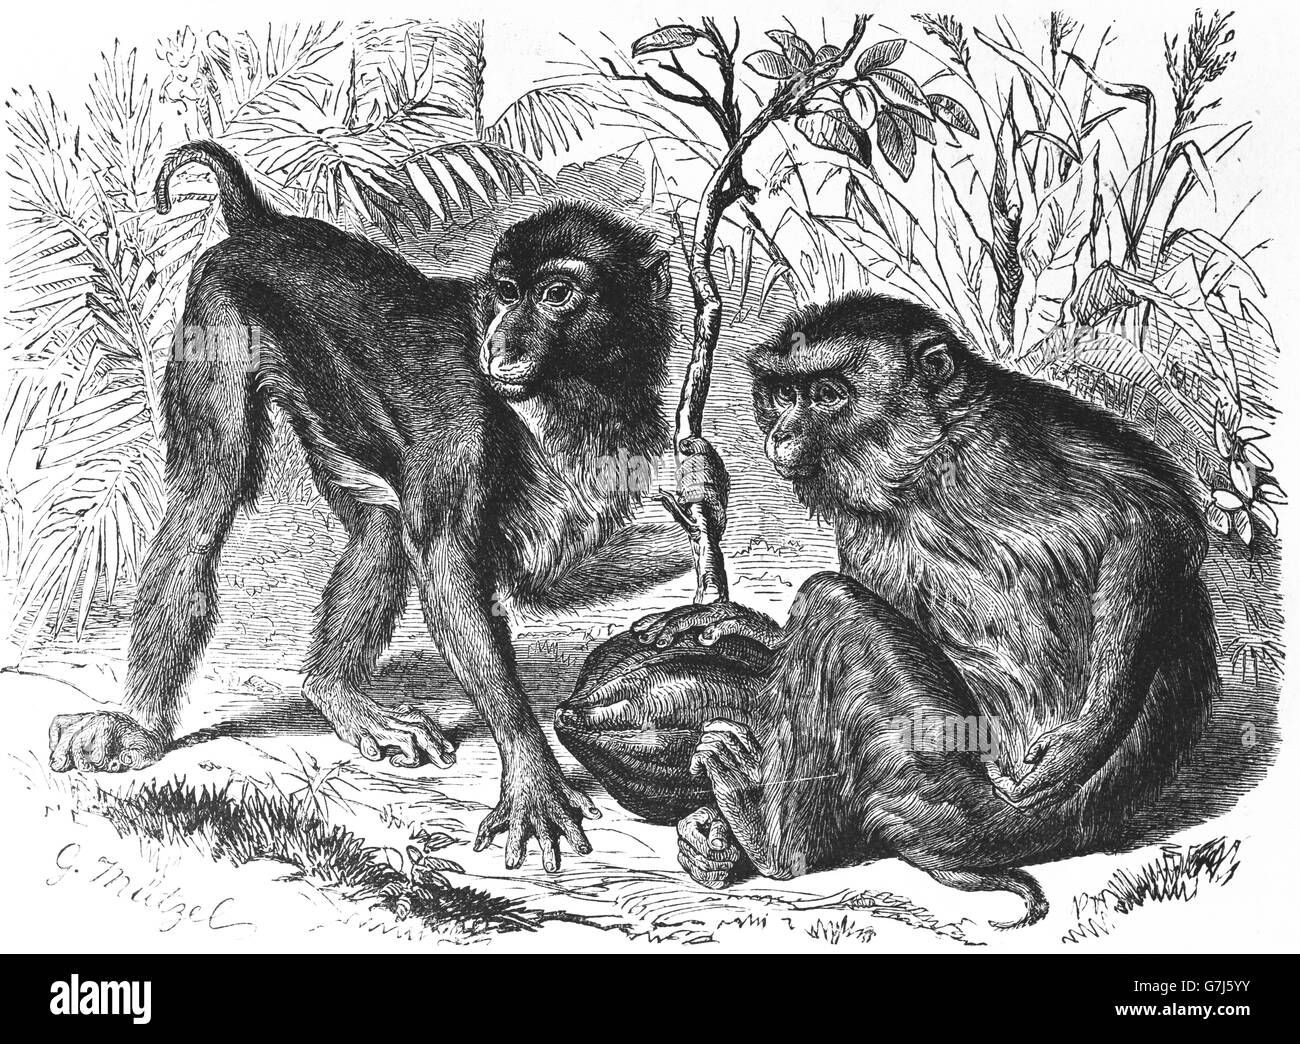 Southern pig-tailed macaque, Macaca nemestrina, Old World monkey, Cercopithecidae, illustration from book dated 1904 Stock Photo